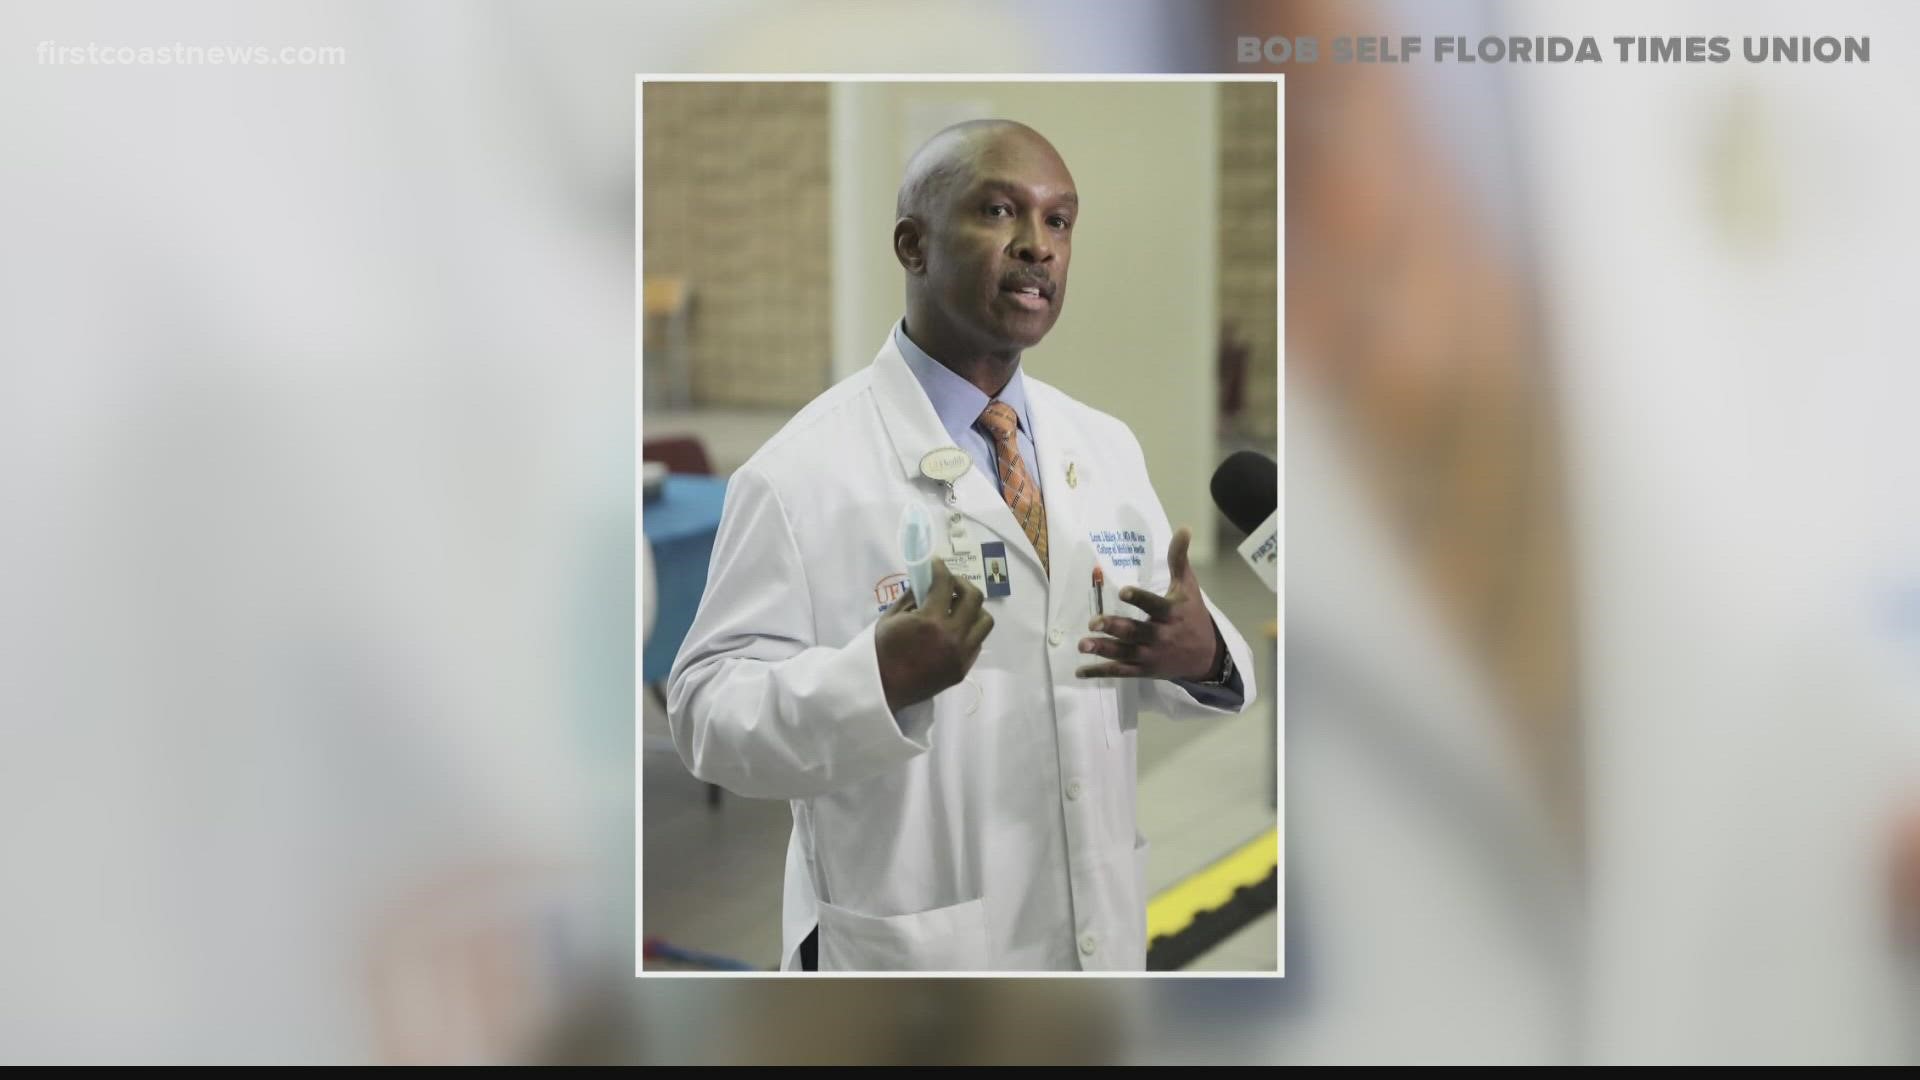 Dr. Leon Haley was a board member for JEA. The utility is honoring his legacy by hosting a one-day vaccination clinic at its headquarters in Downtown Jacksonville.